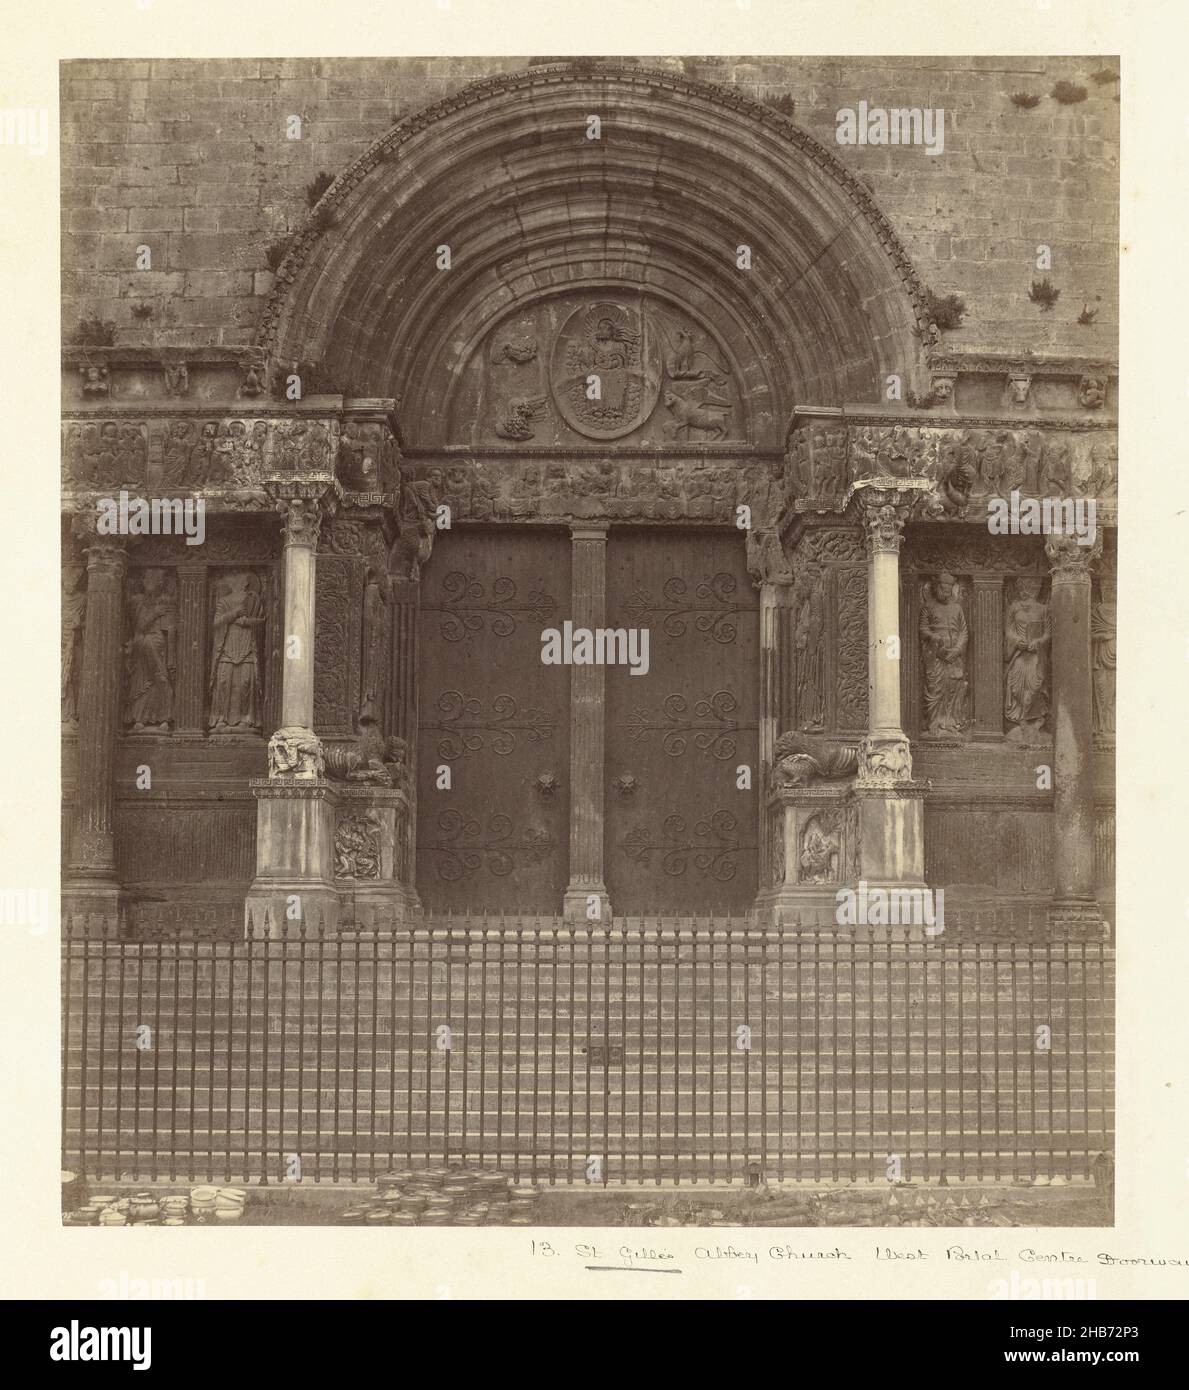 West portal of the abbey church of Saint-Gilles-du-Gard, St. Gilles Abbey Church, West Portal, Centre Doorway (title on object), anonymous, publisher: Downes & Co. Cundall (mentioned on object), Saint-Gilles-du-Gard, publisher: London, 1863 - 1865, paper, cardboard, albumen print, height 264 mm × width 238 mmheight 480 mm × width 380 mm Stock Photo